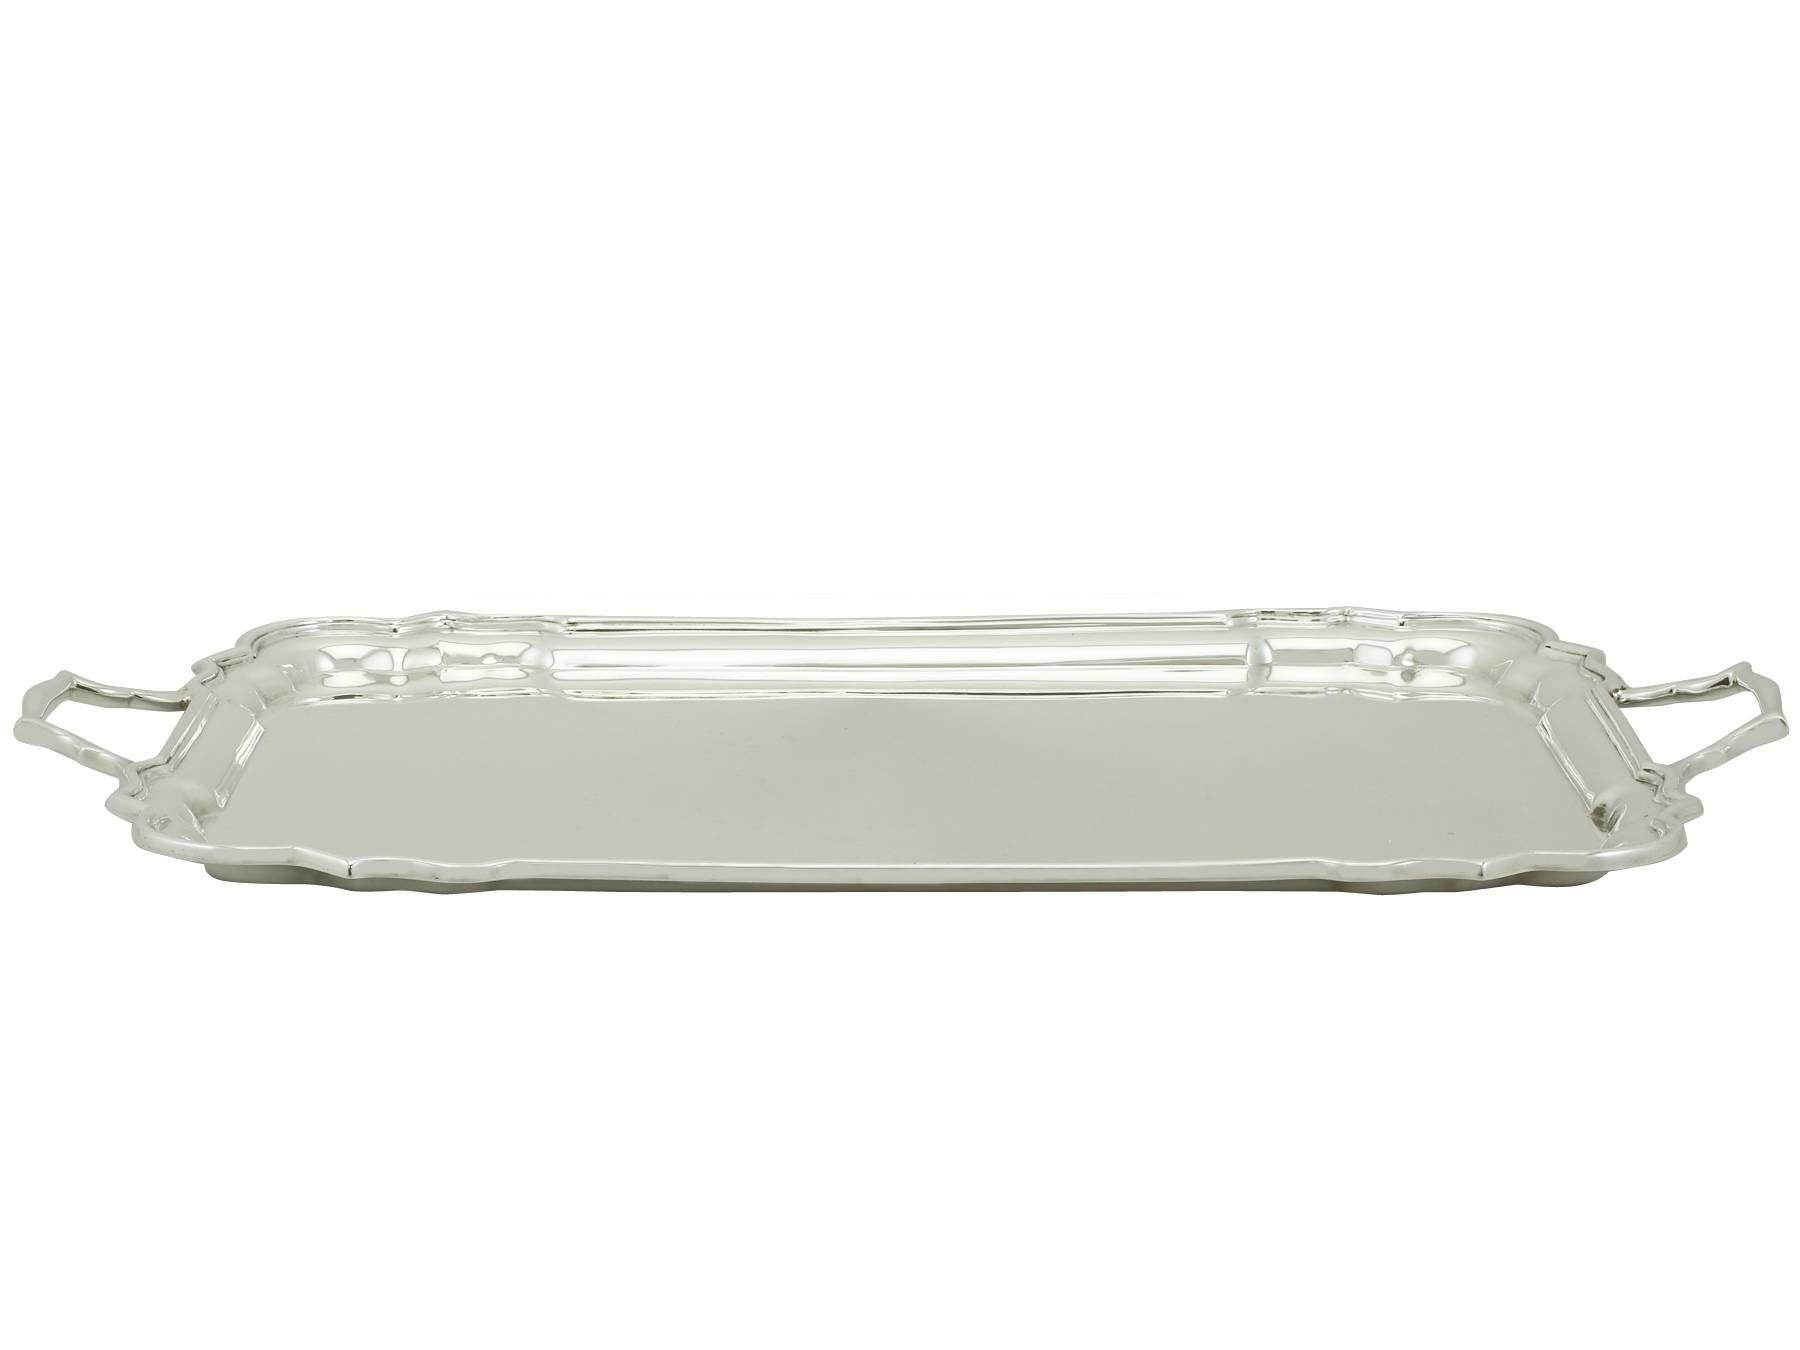 An exceptional, fine and impressive vintage George VI English sterling silver drinks tray; an addition to silver tea ware collection.

This exceptional vintage George VI sterling silver drinks tray has a plain rectangular form with incurved shaped